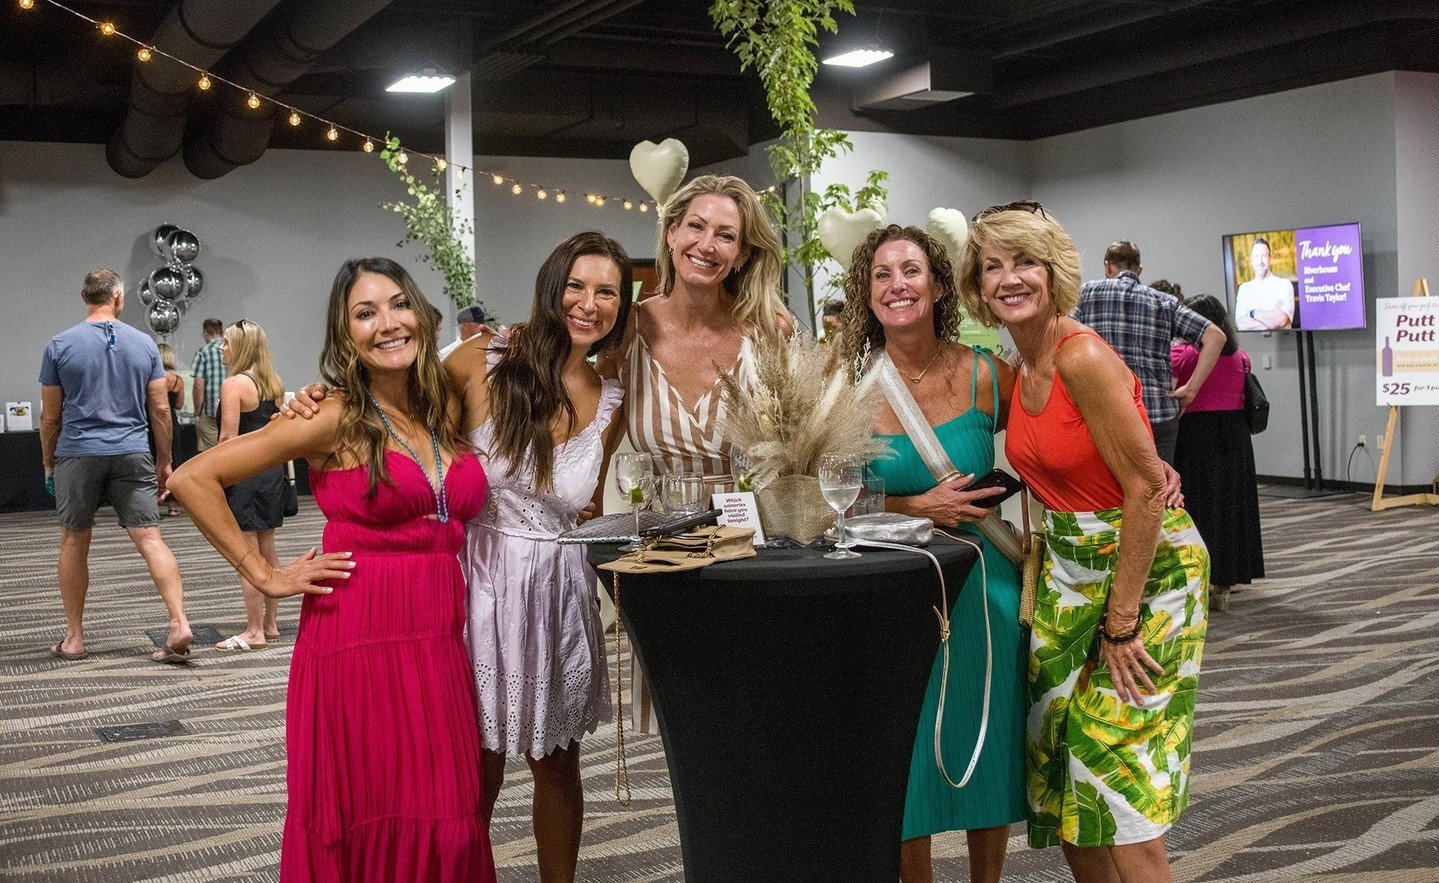 Are you ready to get this party started? We are! Grab the girls and get your tickets to this year's Cork &amp; Barrel!⁠
⁠
Hop over to our linkin.bio for tickets and event info!⁠
⁠
We look forward to seeing you and your fabulous crew at a Winemaker Di